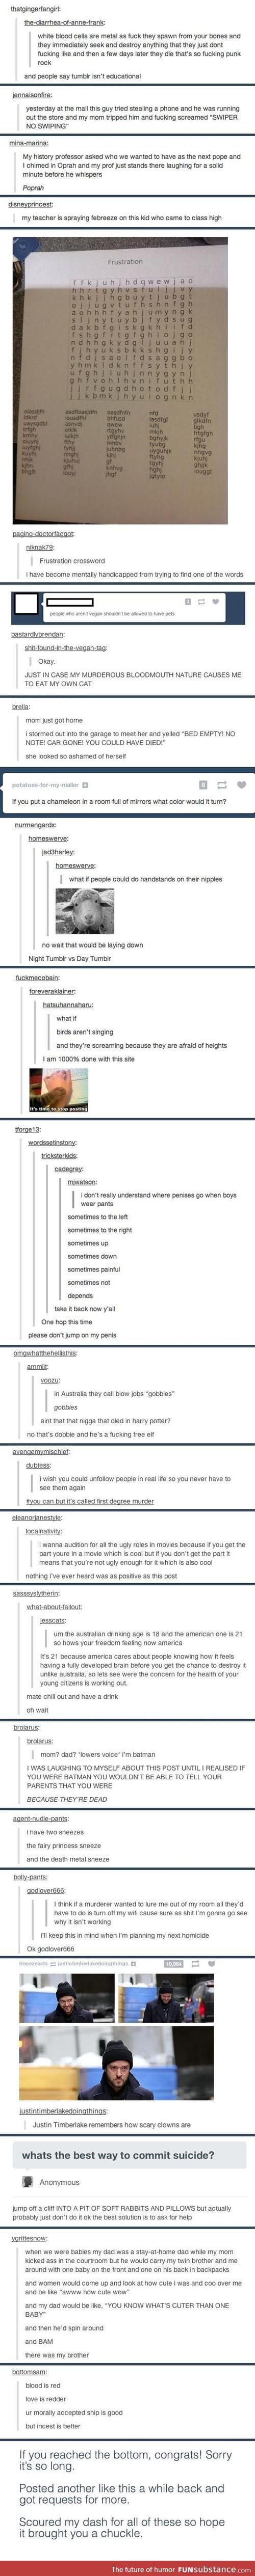 Long Tumblr post, but it's very funny!